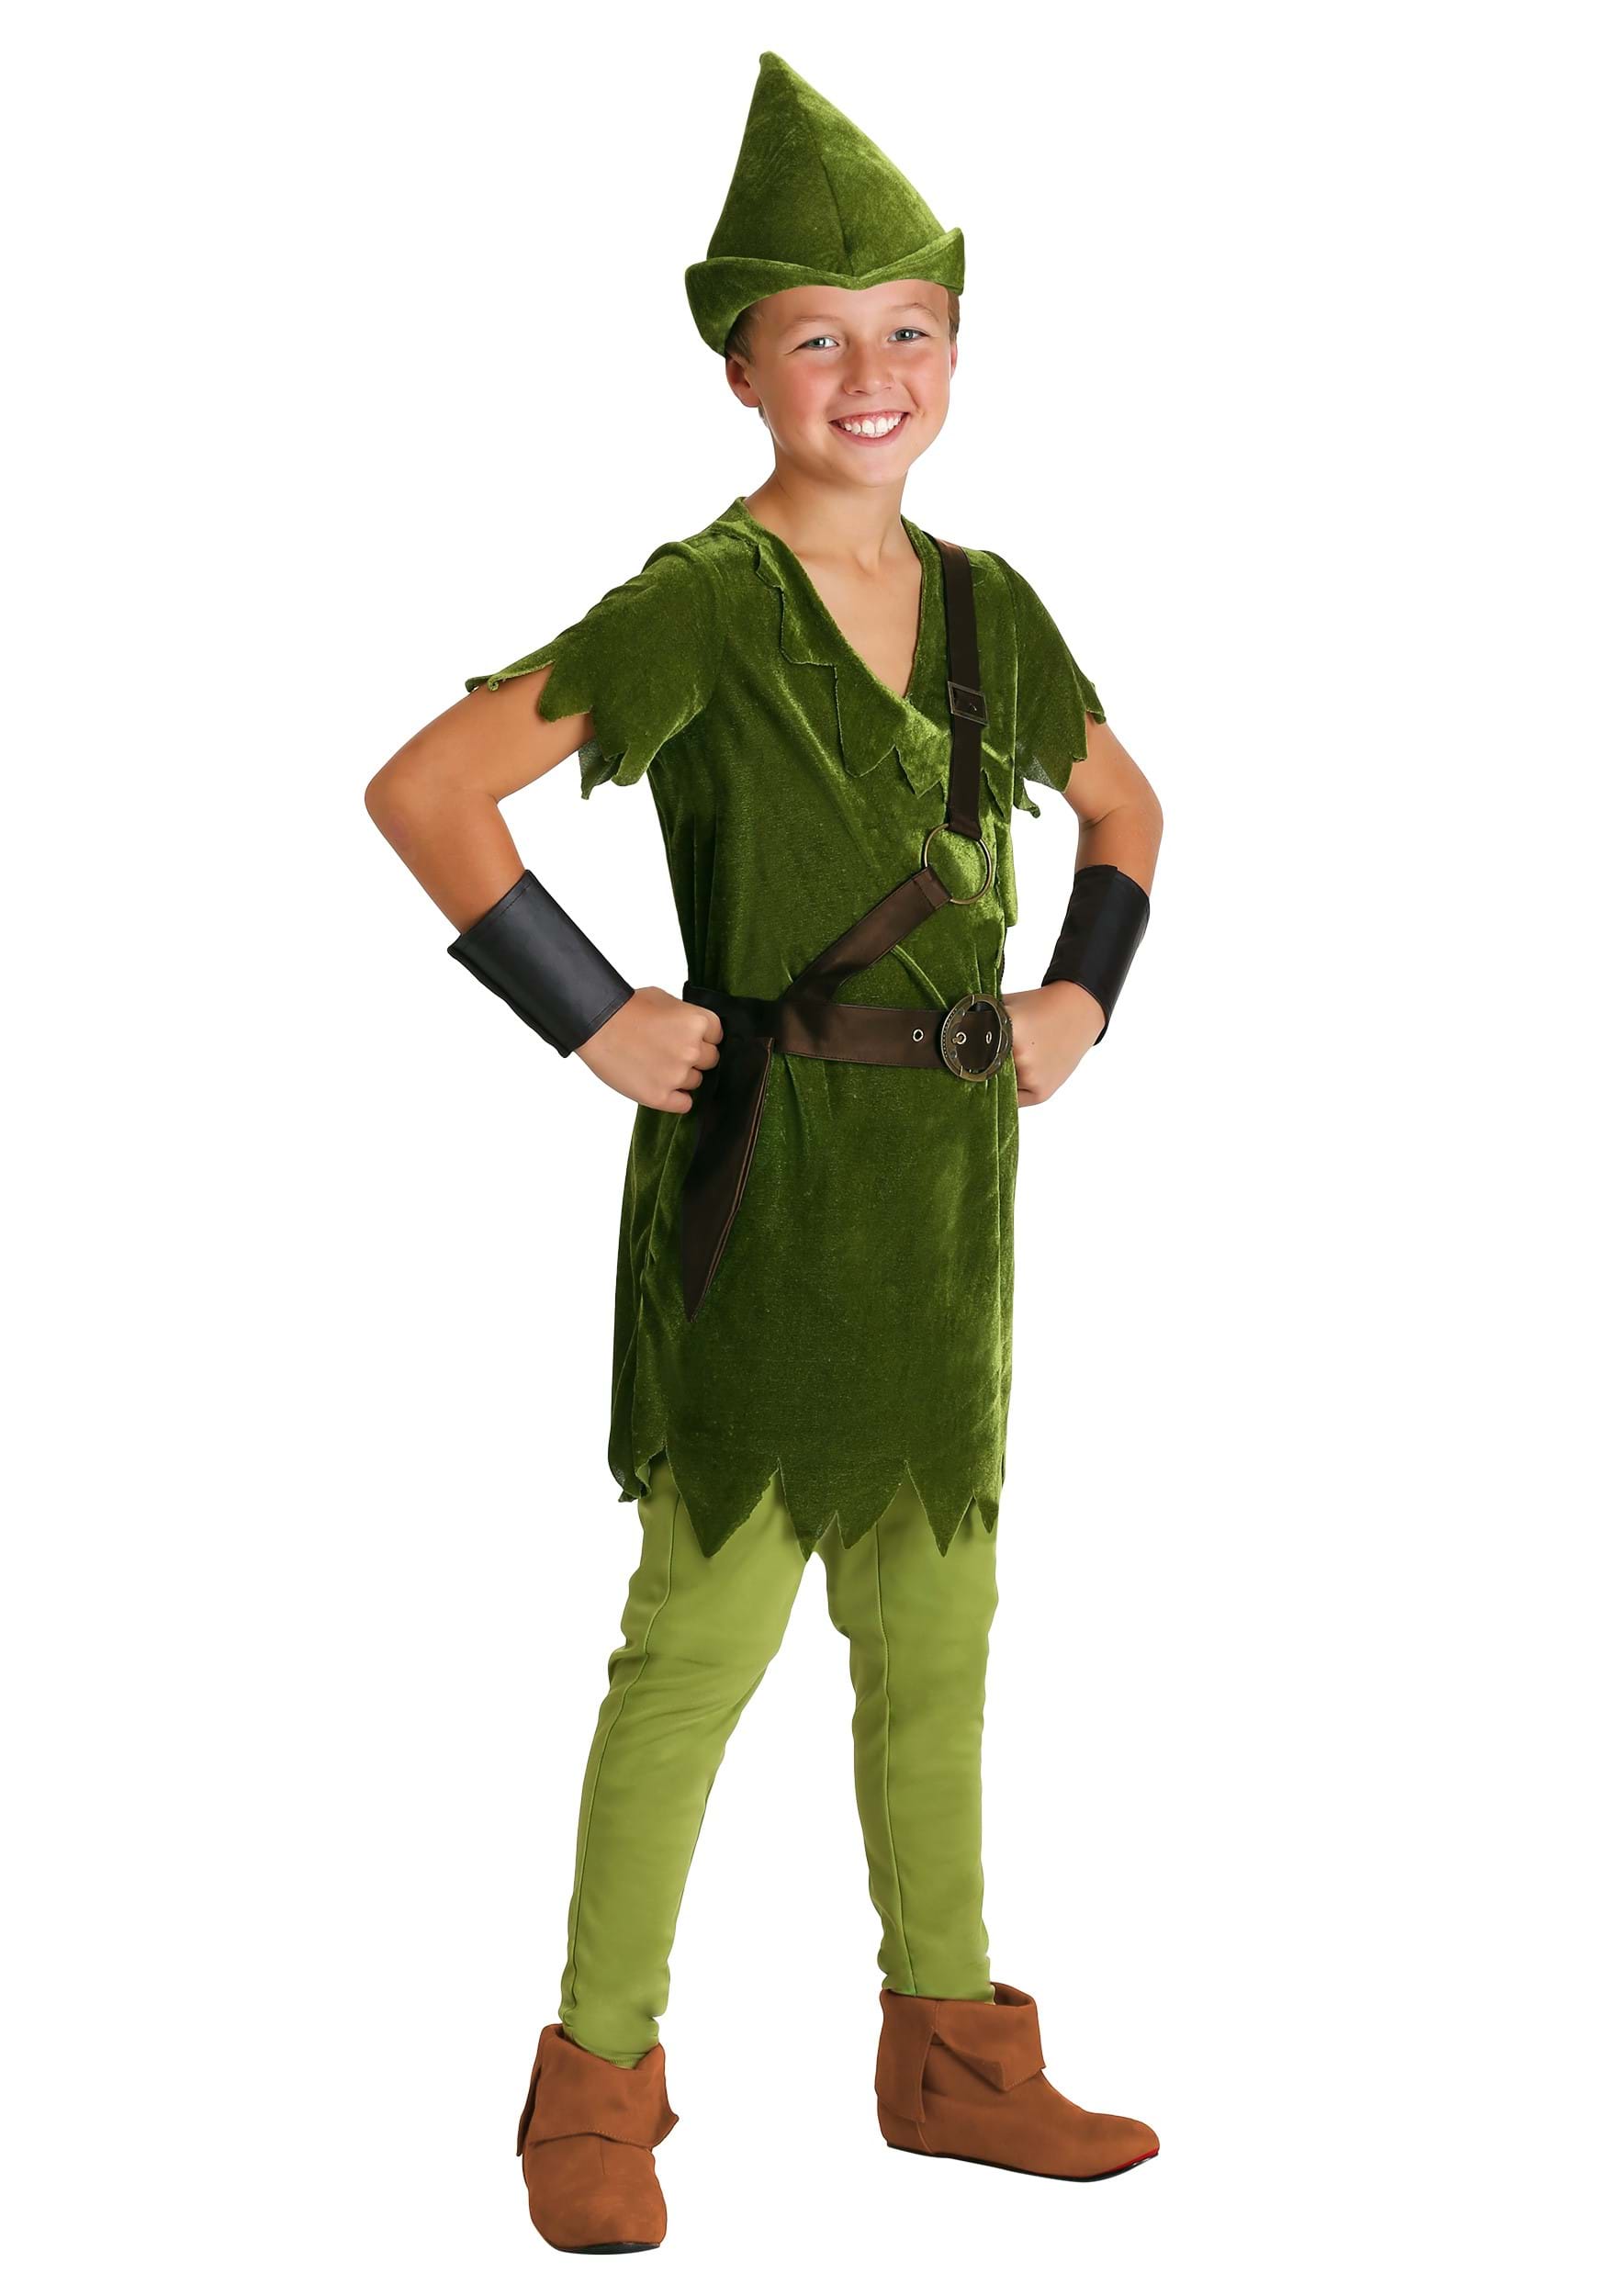 Photos - Fancy Dress A&D FUN Costumes Classic Peter Pan Kids Costume | Exclusive | Made By Us Green 